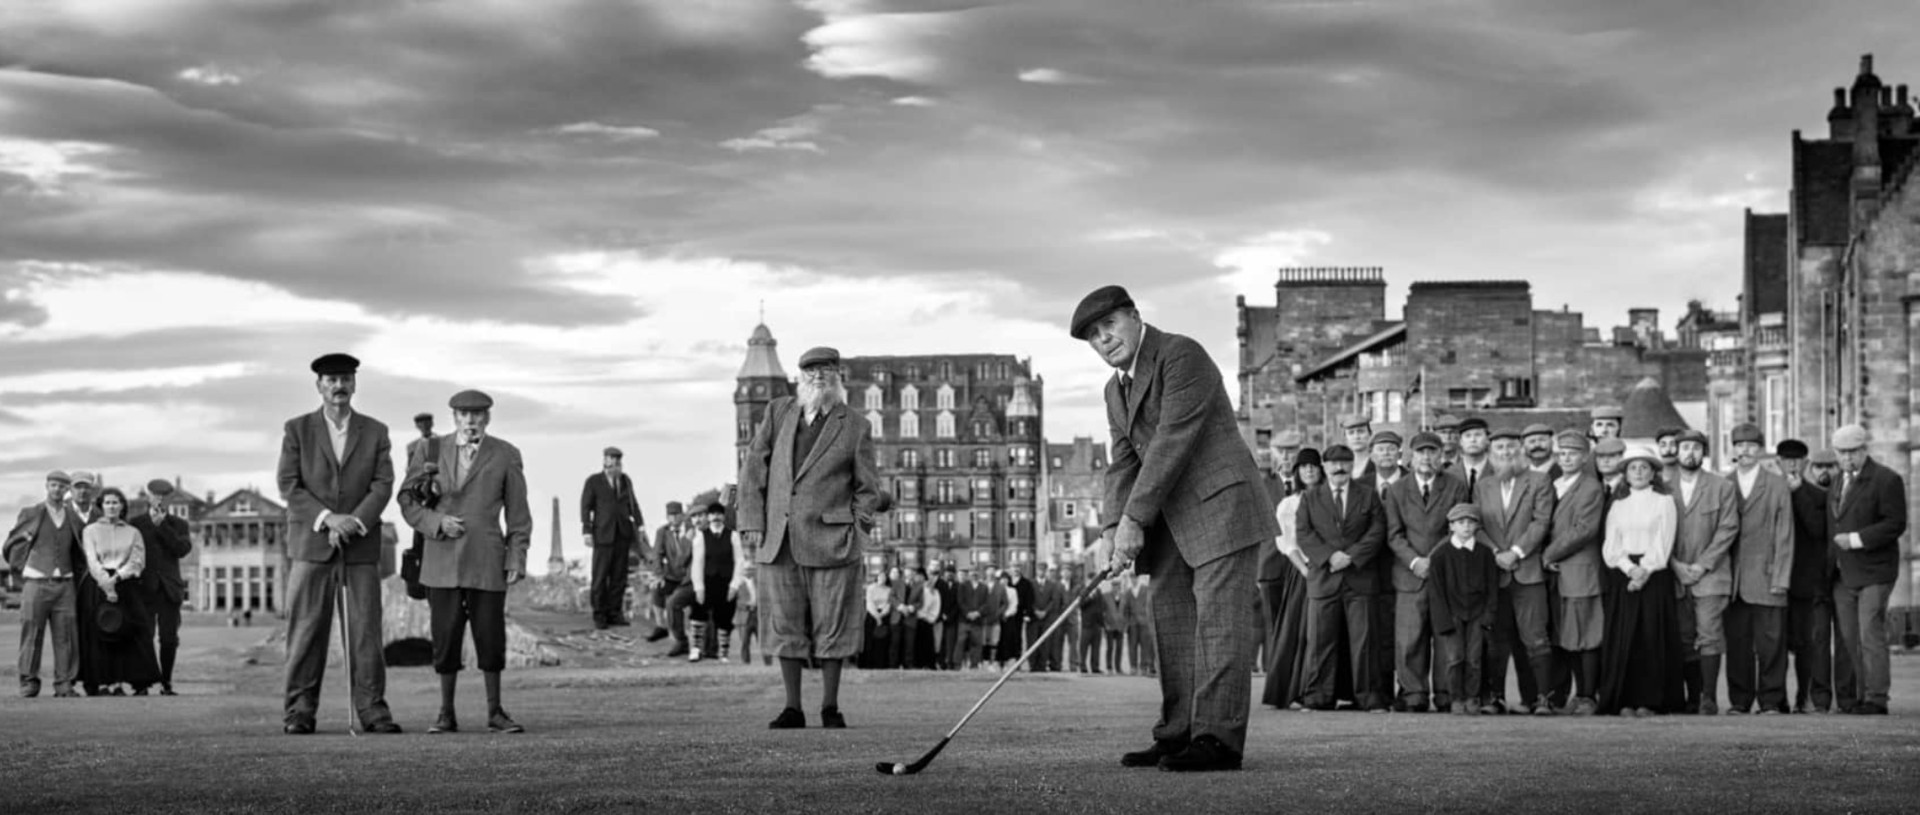 The Home of Golf (Commemorative Edition Signed by Gary Player) by David Yarrow